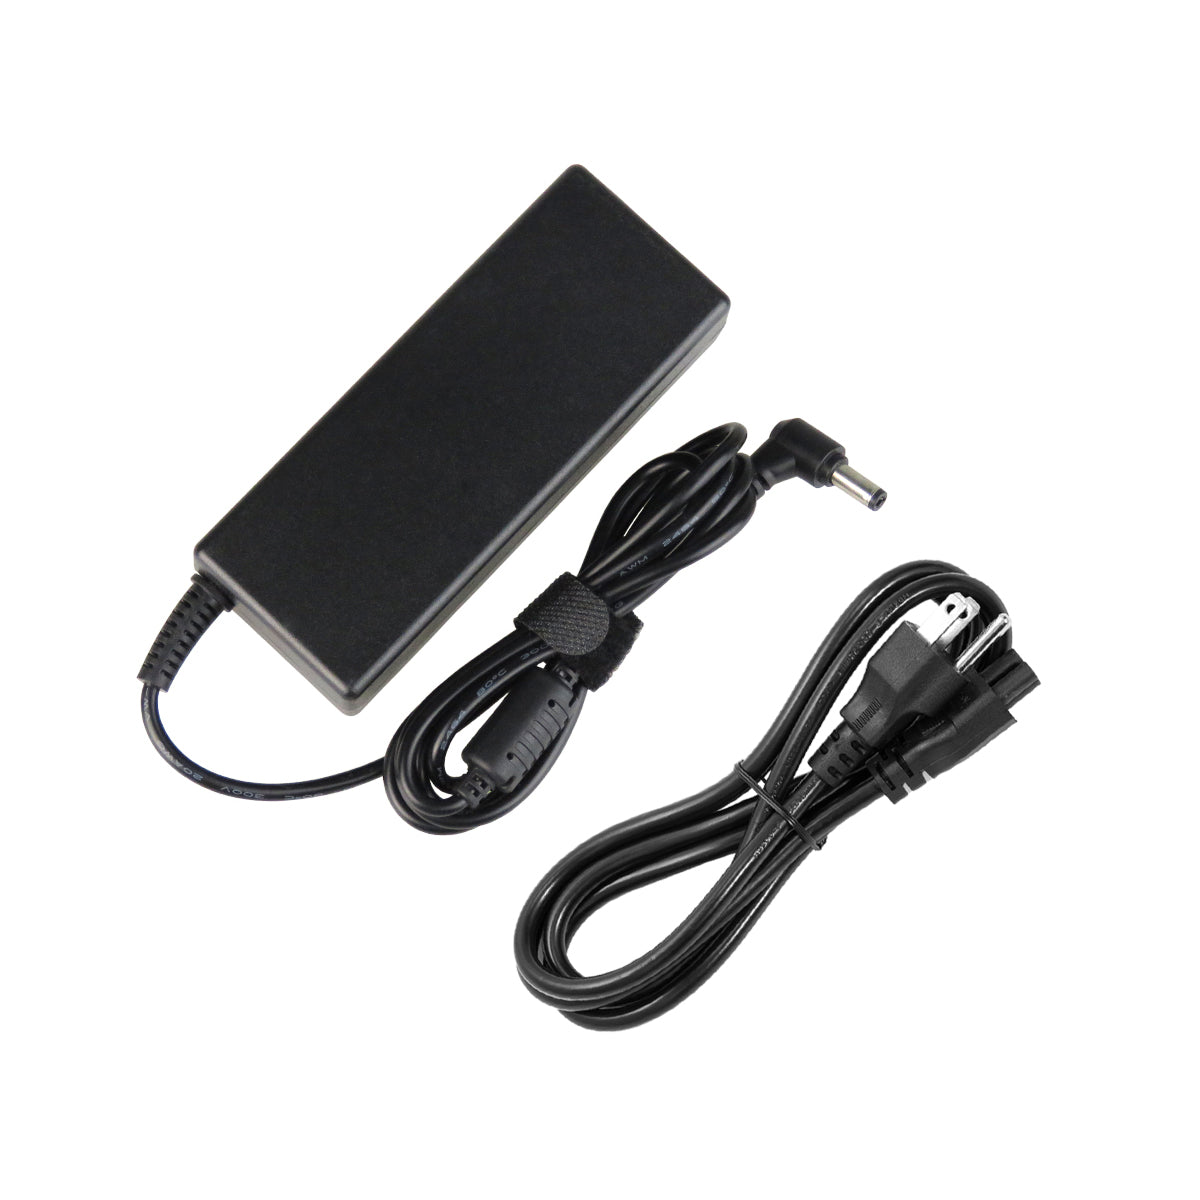 AC Adapter Charger for ASUS N76VJ Notebook.